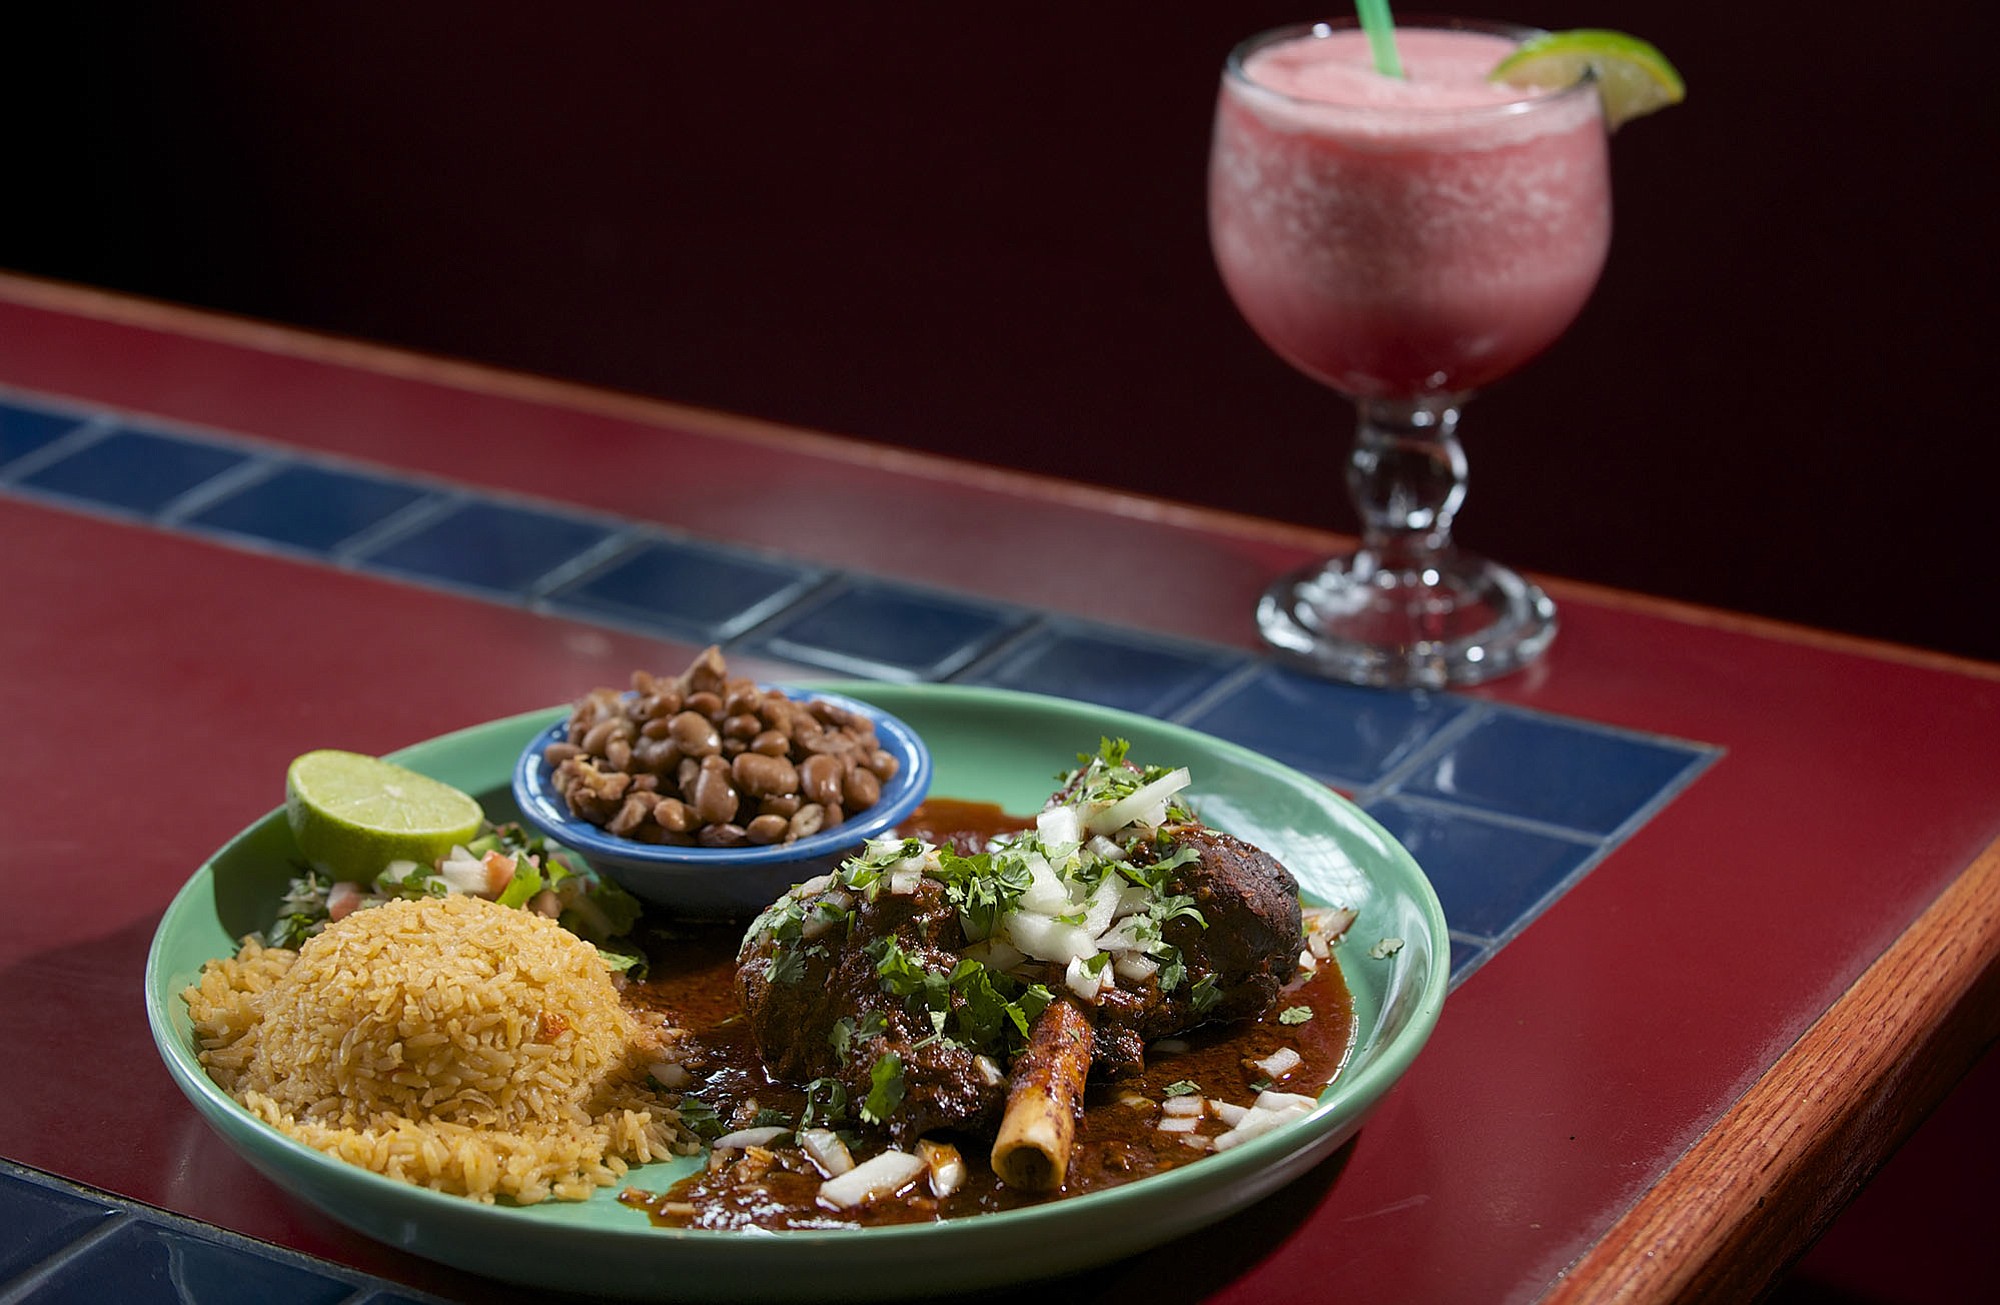 Zachary Kaufman/The Columbian
Lamb marinated in a special sauce is served with rice, whole beans and tortillas at Los Dos Compadres in Washougal.